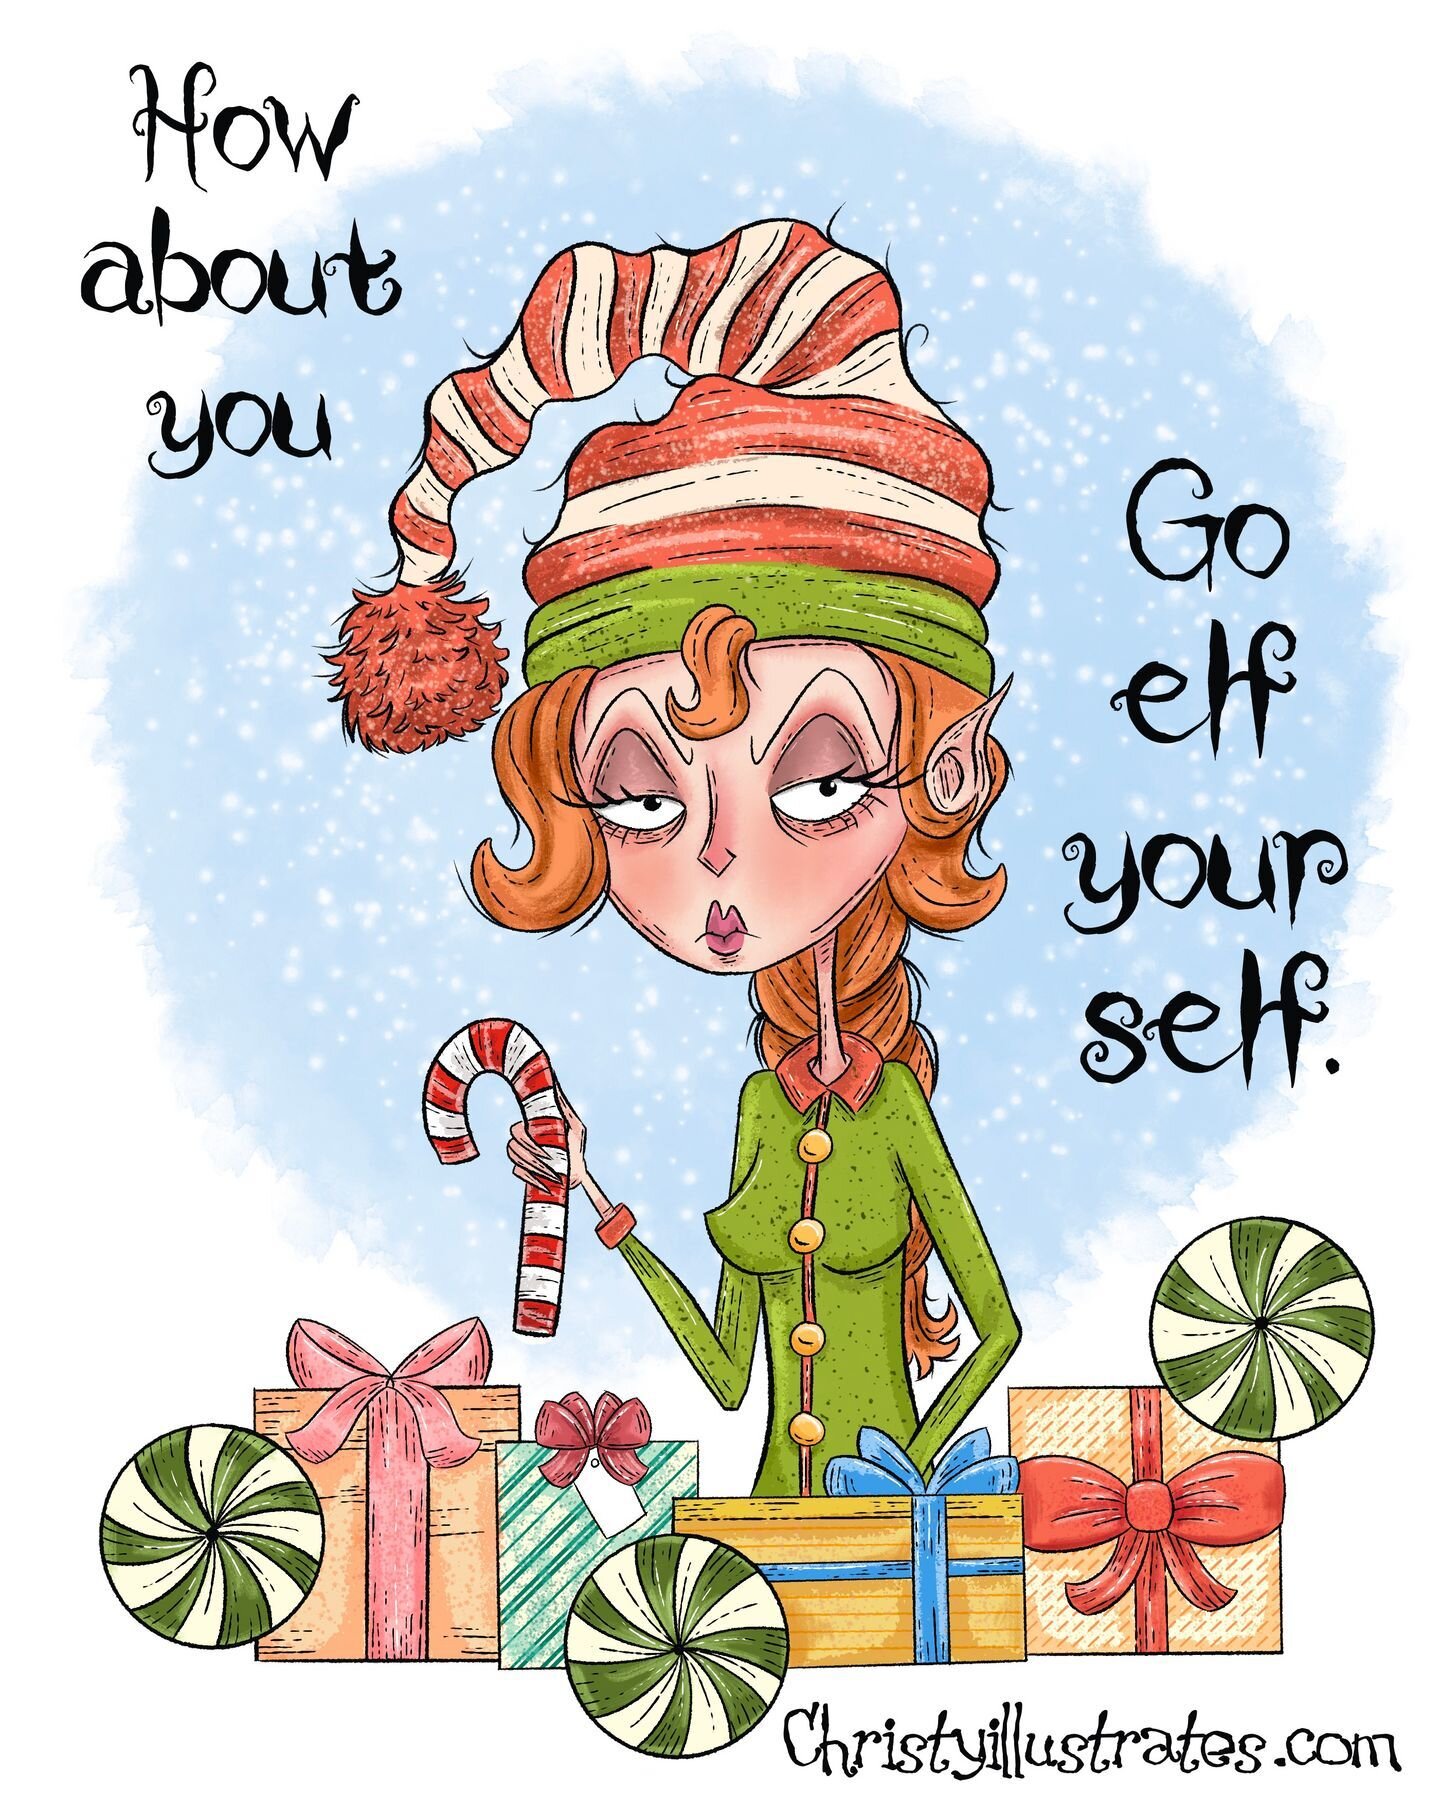 Time for you to go elf yourself. 
 
When I was a kid, without the salvation army and my grandfather's church, there would have been no Christmas. 
 
The plastic doll, Chinese checkers, and legos - wasn't anything like it. 
 
In the small window of ti